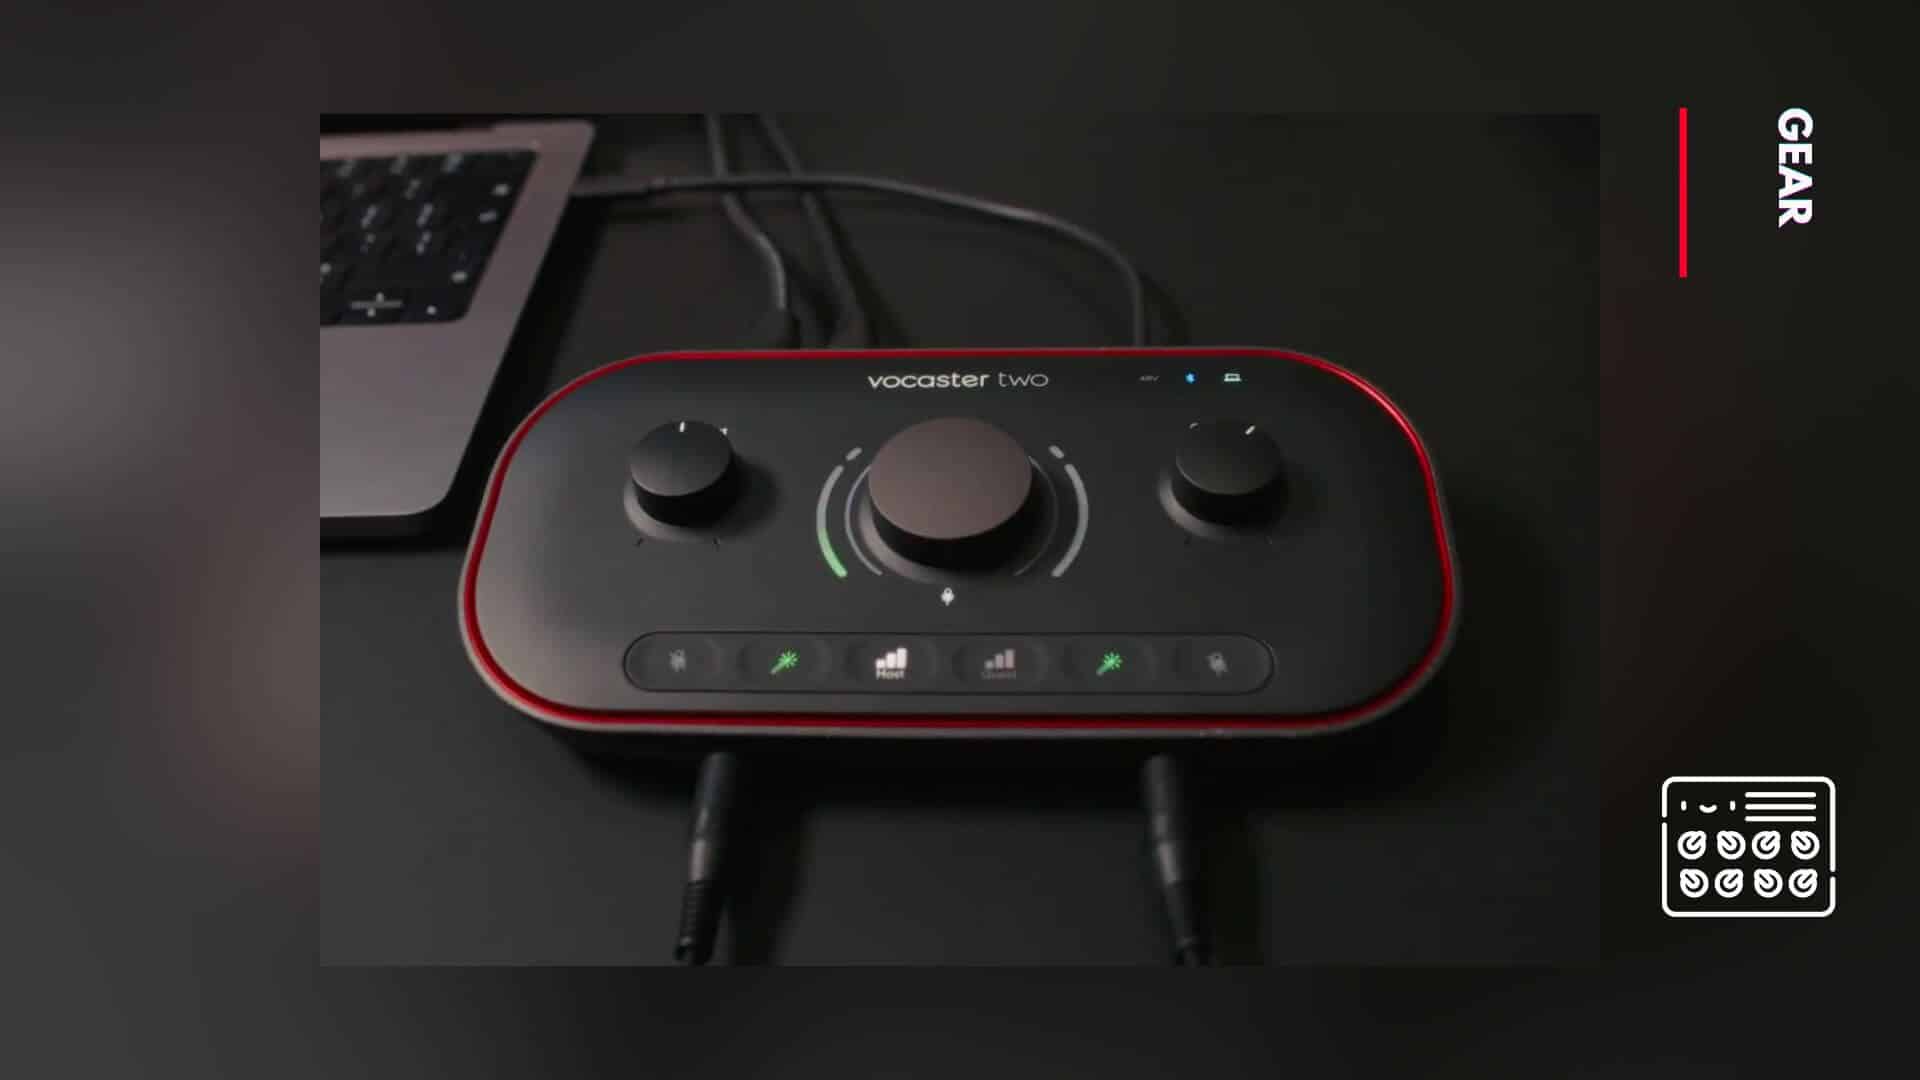 Focusrite Vocaster- Audio interface series perfect for podcasters